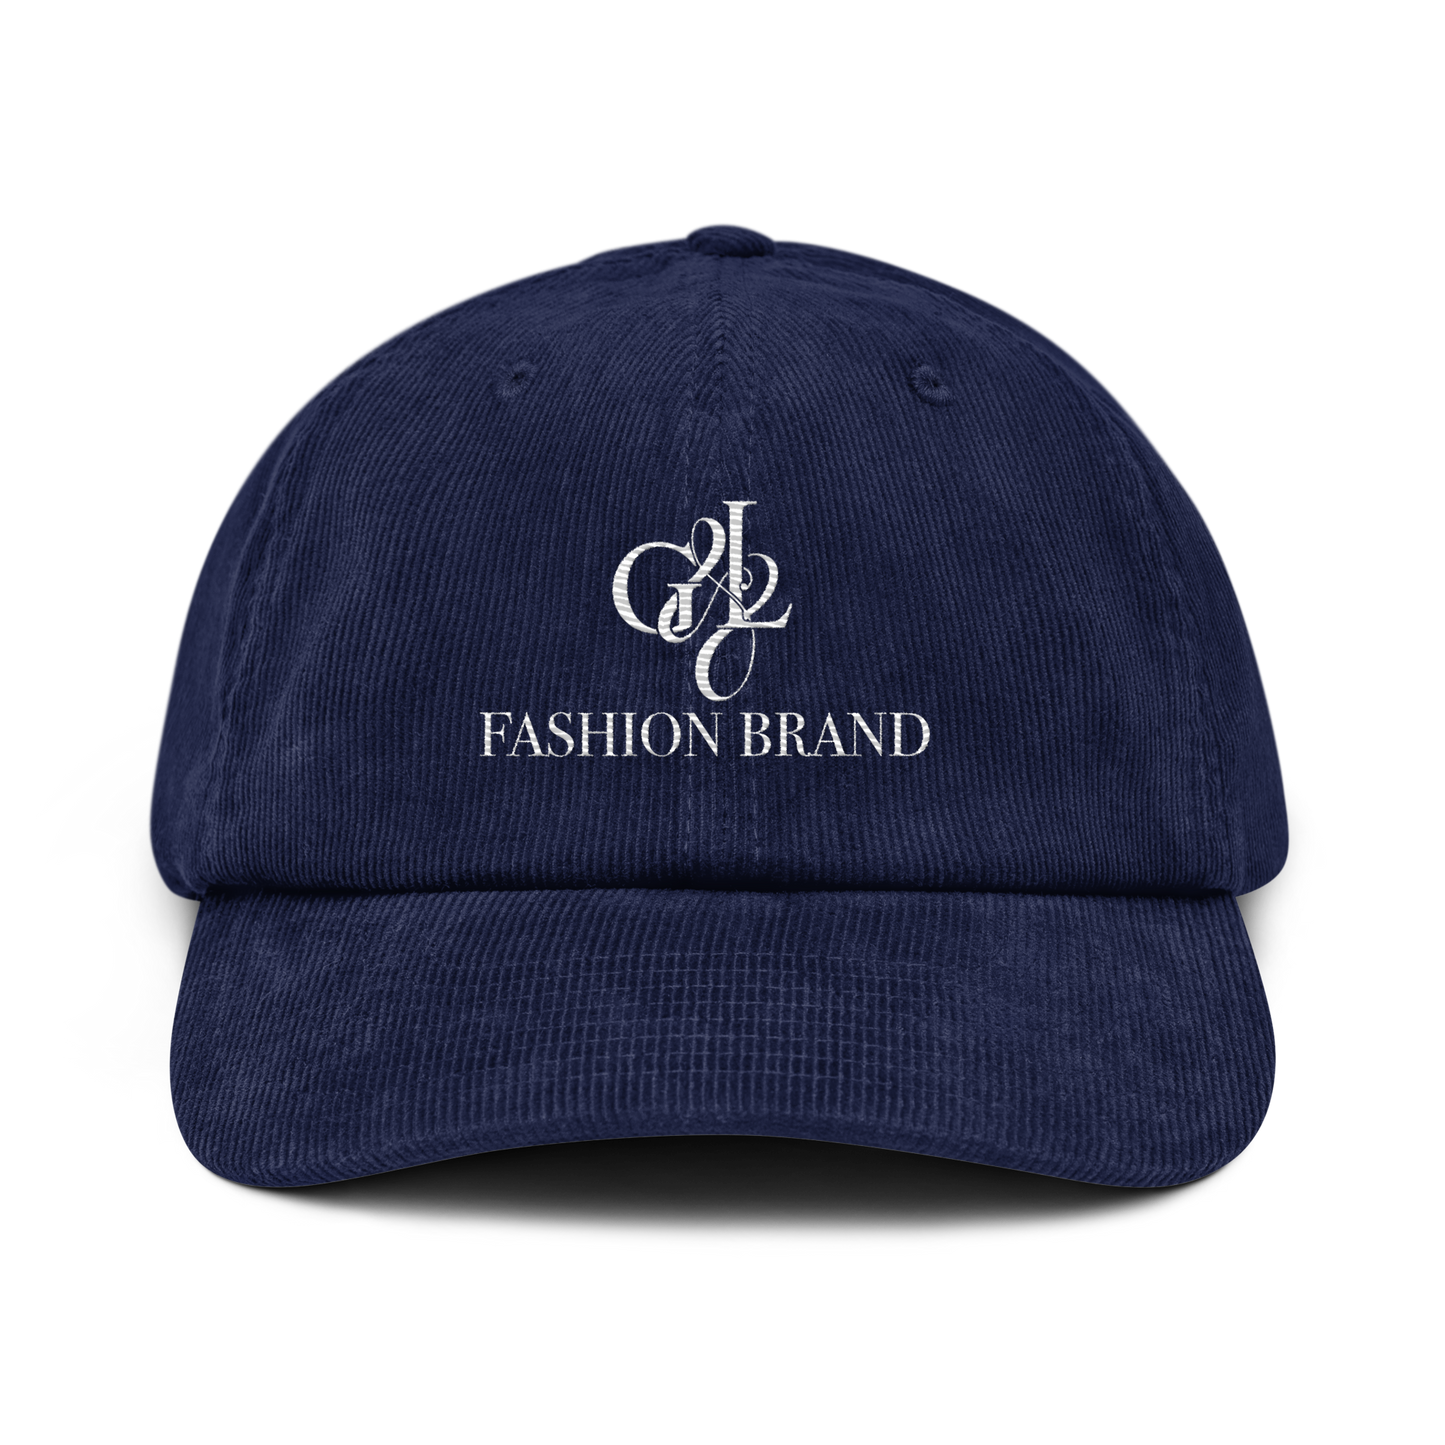 Discover timeless elegance with G&L Fashion Brand’s hat collection. Available in black, navy, green, and brown, each hat features the G&L Fashion Brand logo. Elevate your style with these versatile and sophisticated accessories.